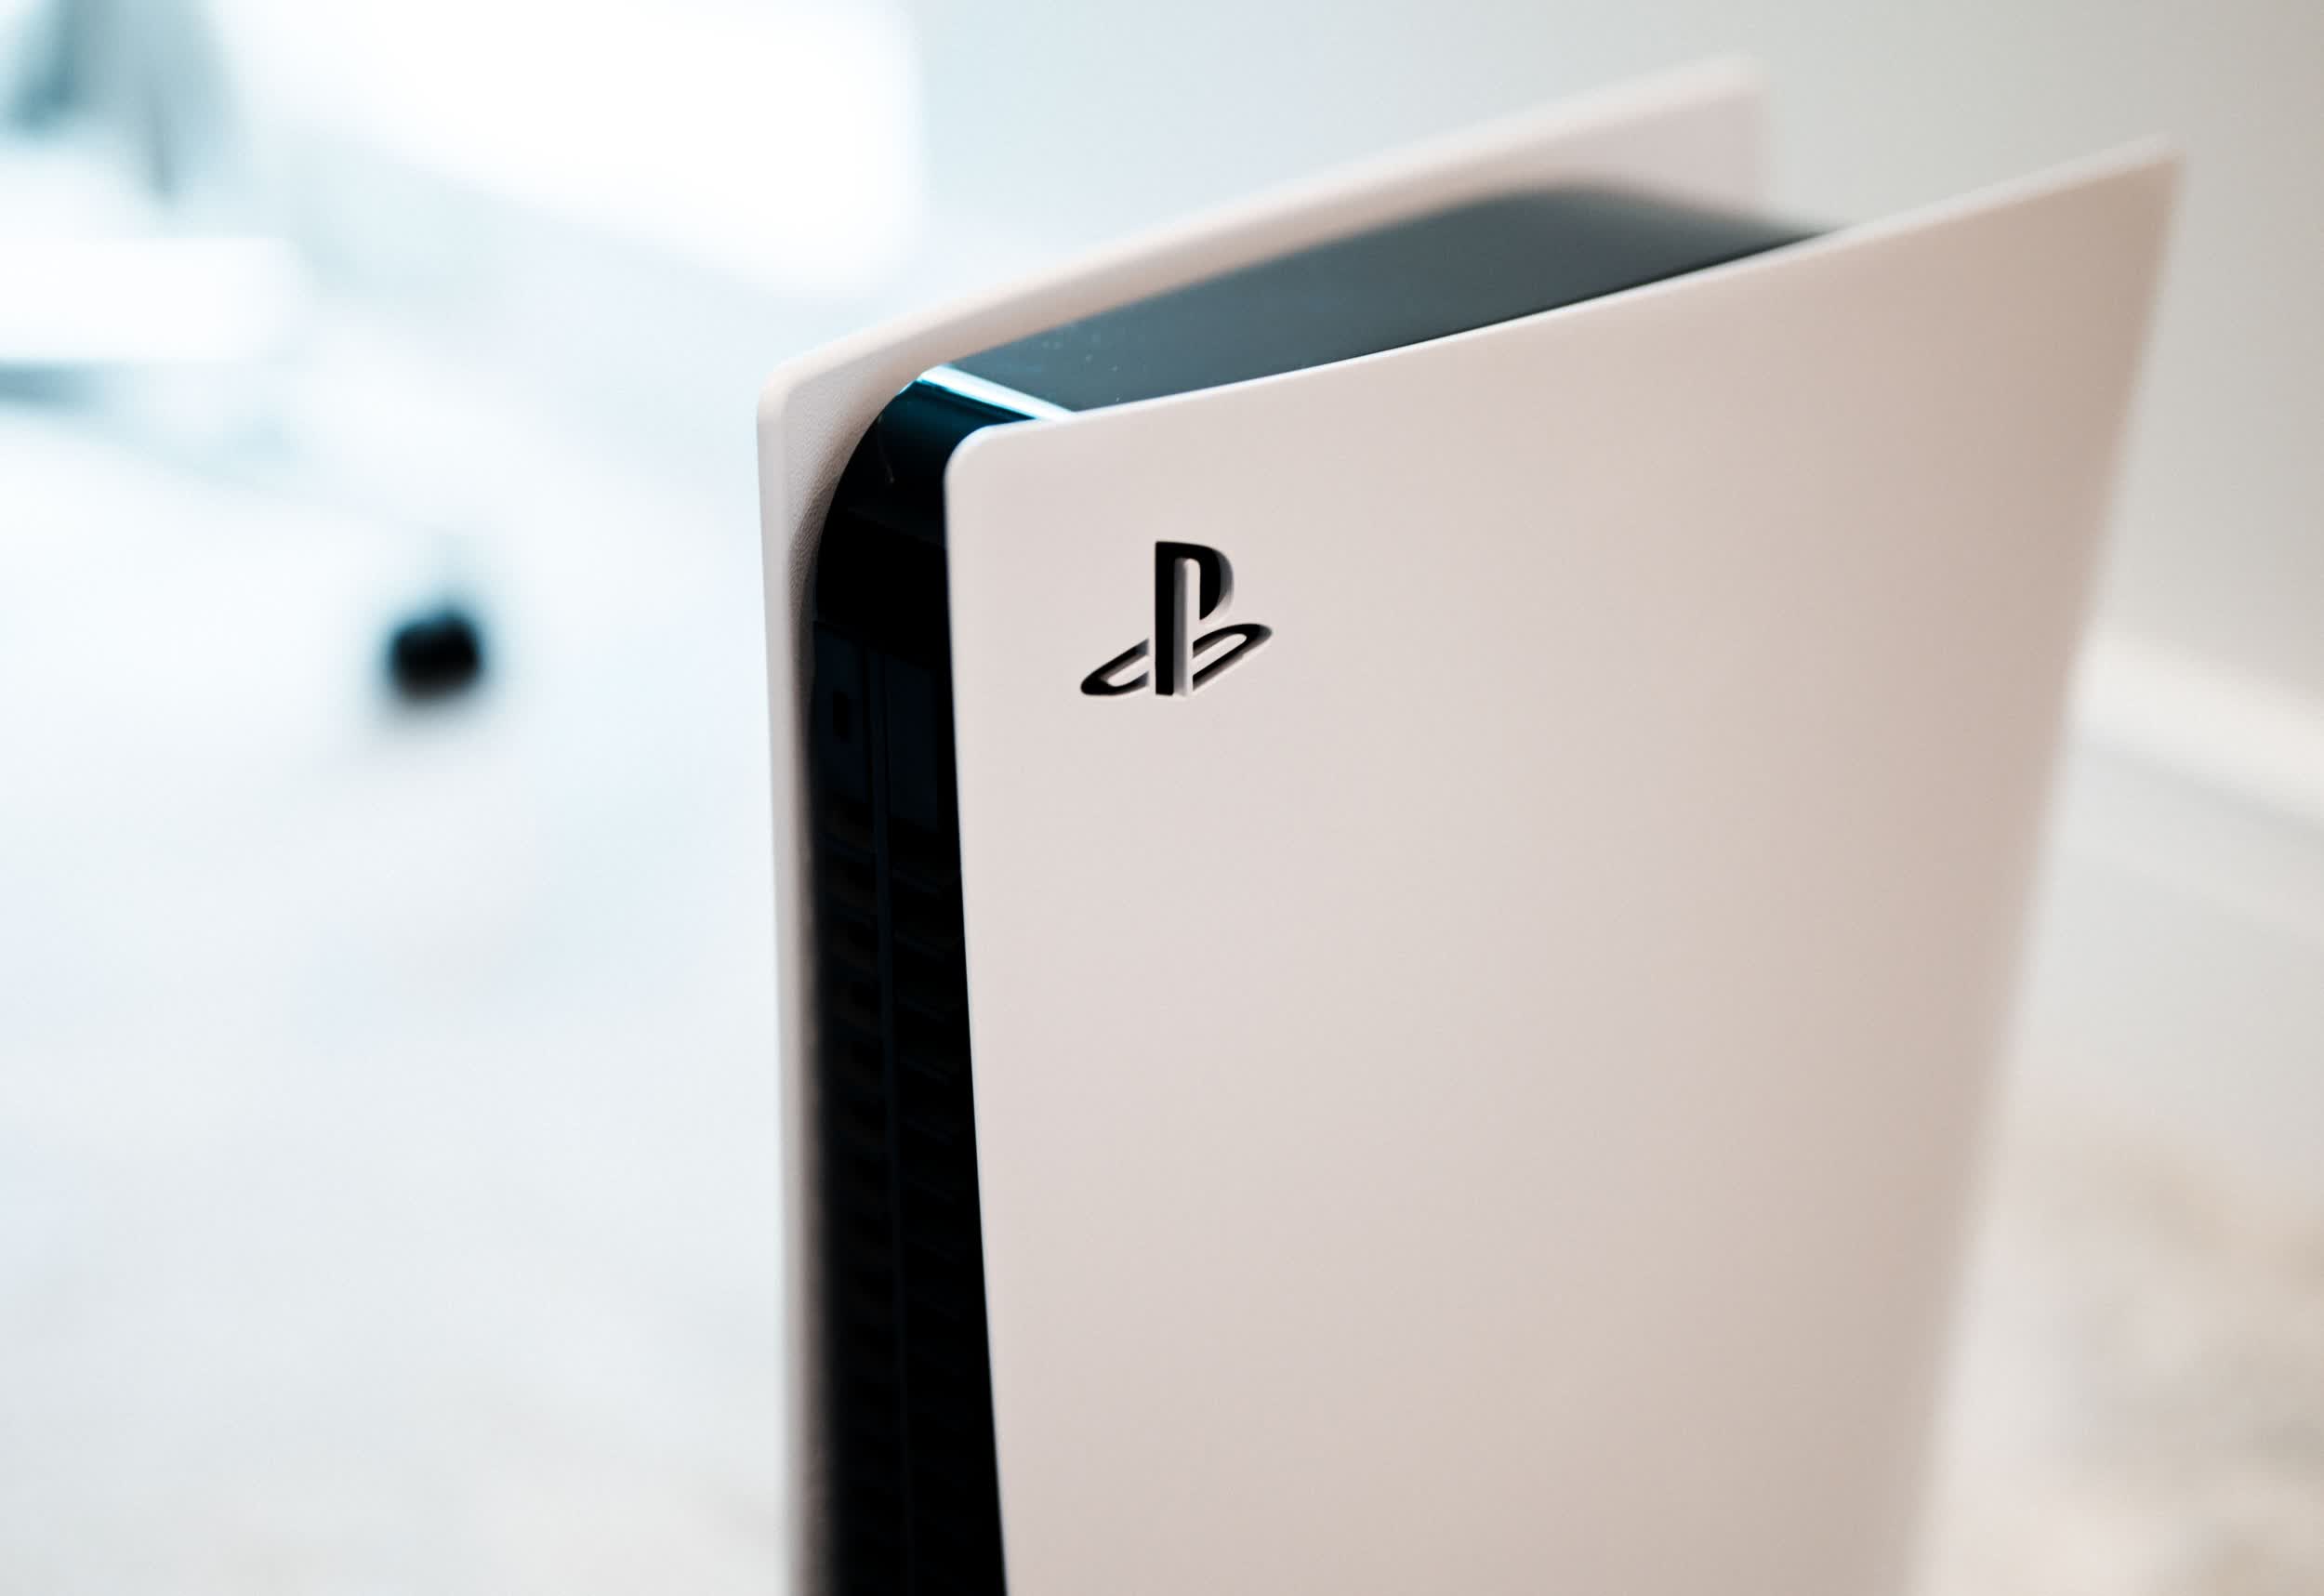 Die shot reveals new PS5 model moves to a new 6nm ‘Oberon Plus’ chip